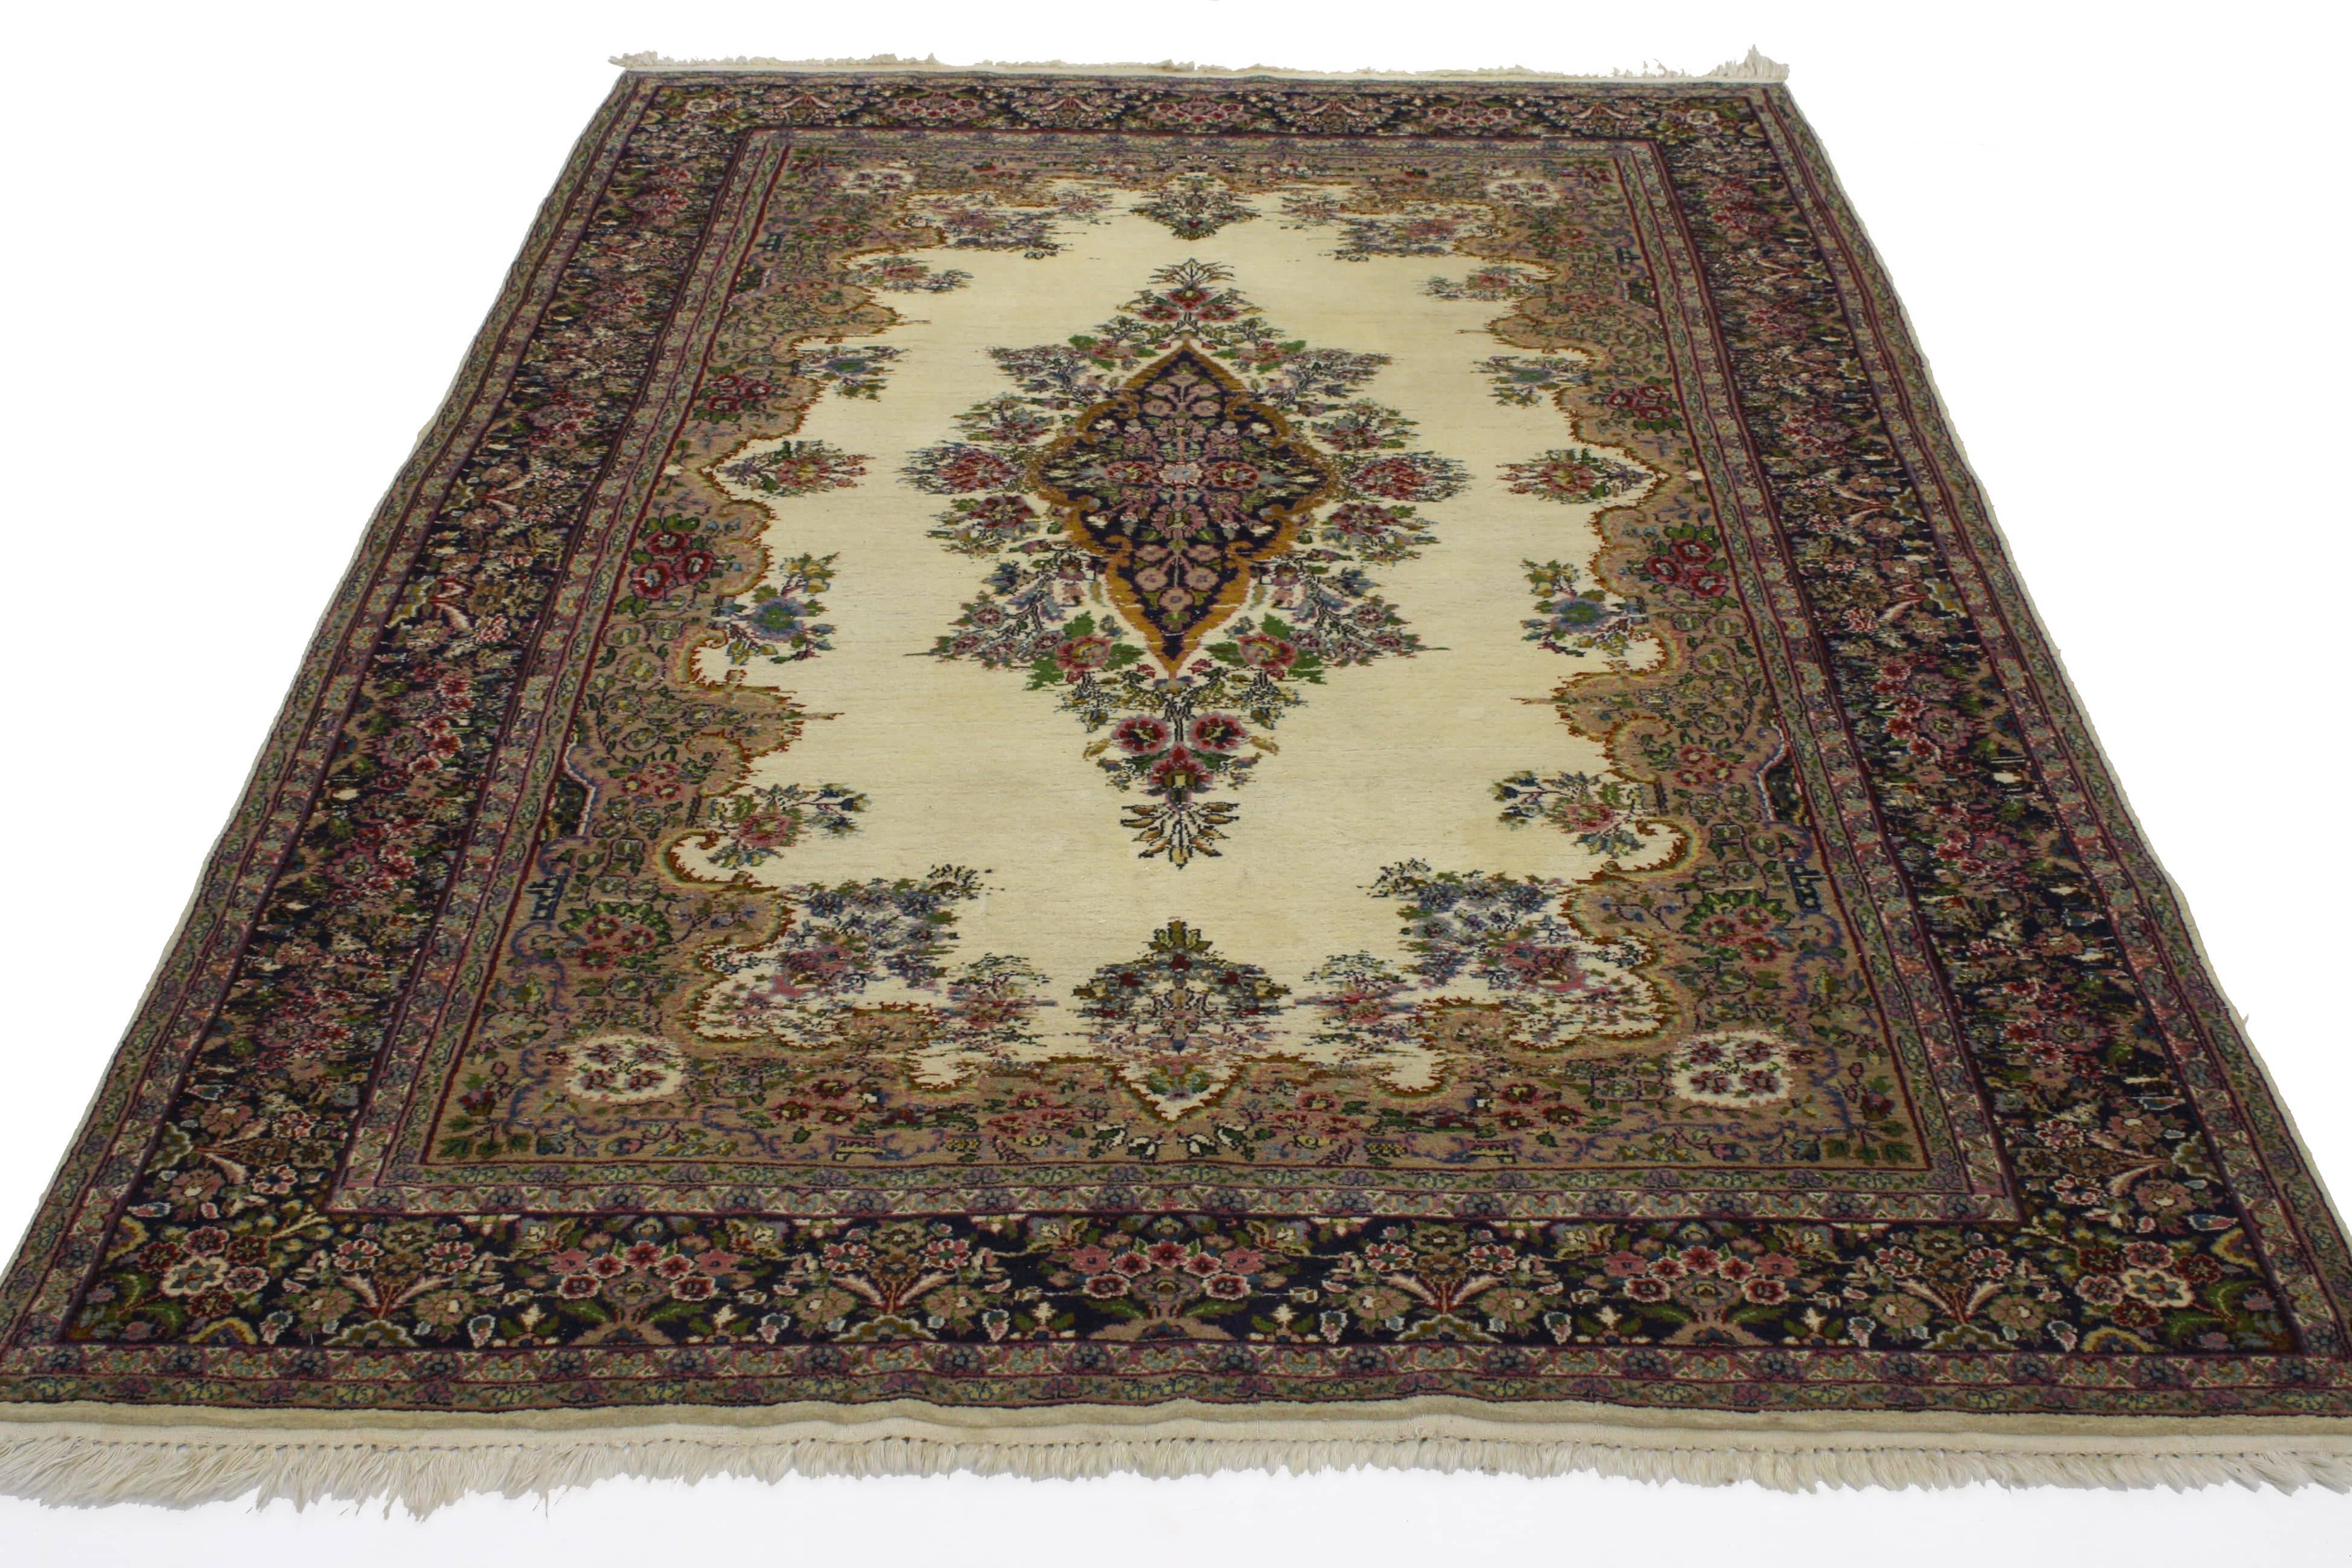 76707 Vintage Kerman Rug with French Victorian Style 04'11 x 07'02. Multi-color leaves and flowers abound in this beautiful vintage Kerman rug. This French Victorian-era style Kirman carpet is a stunning visual display of flowers and architectural